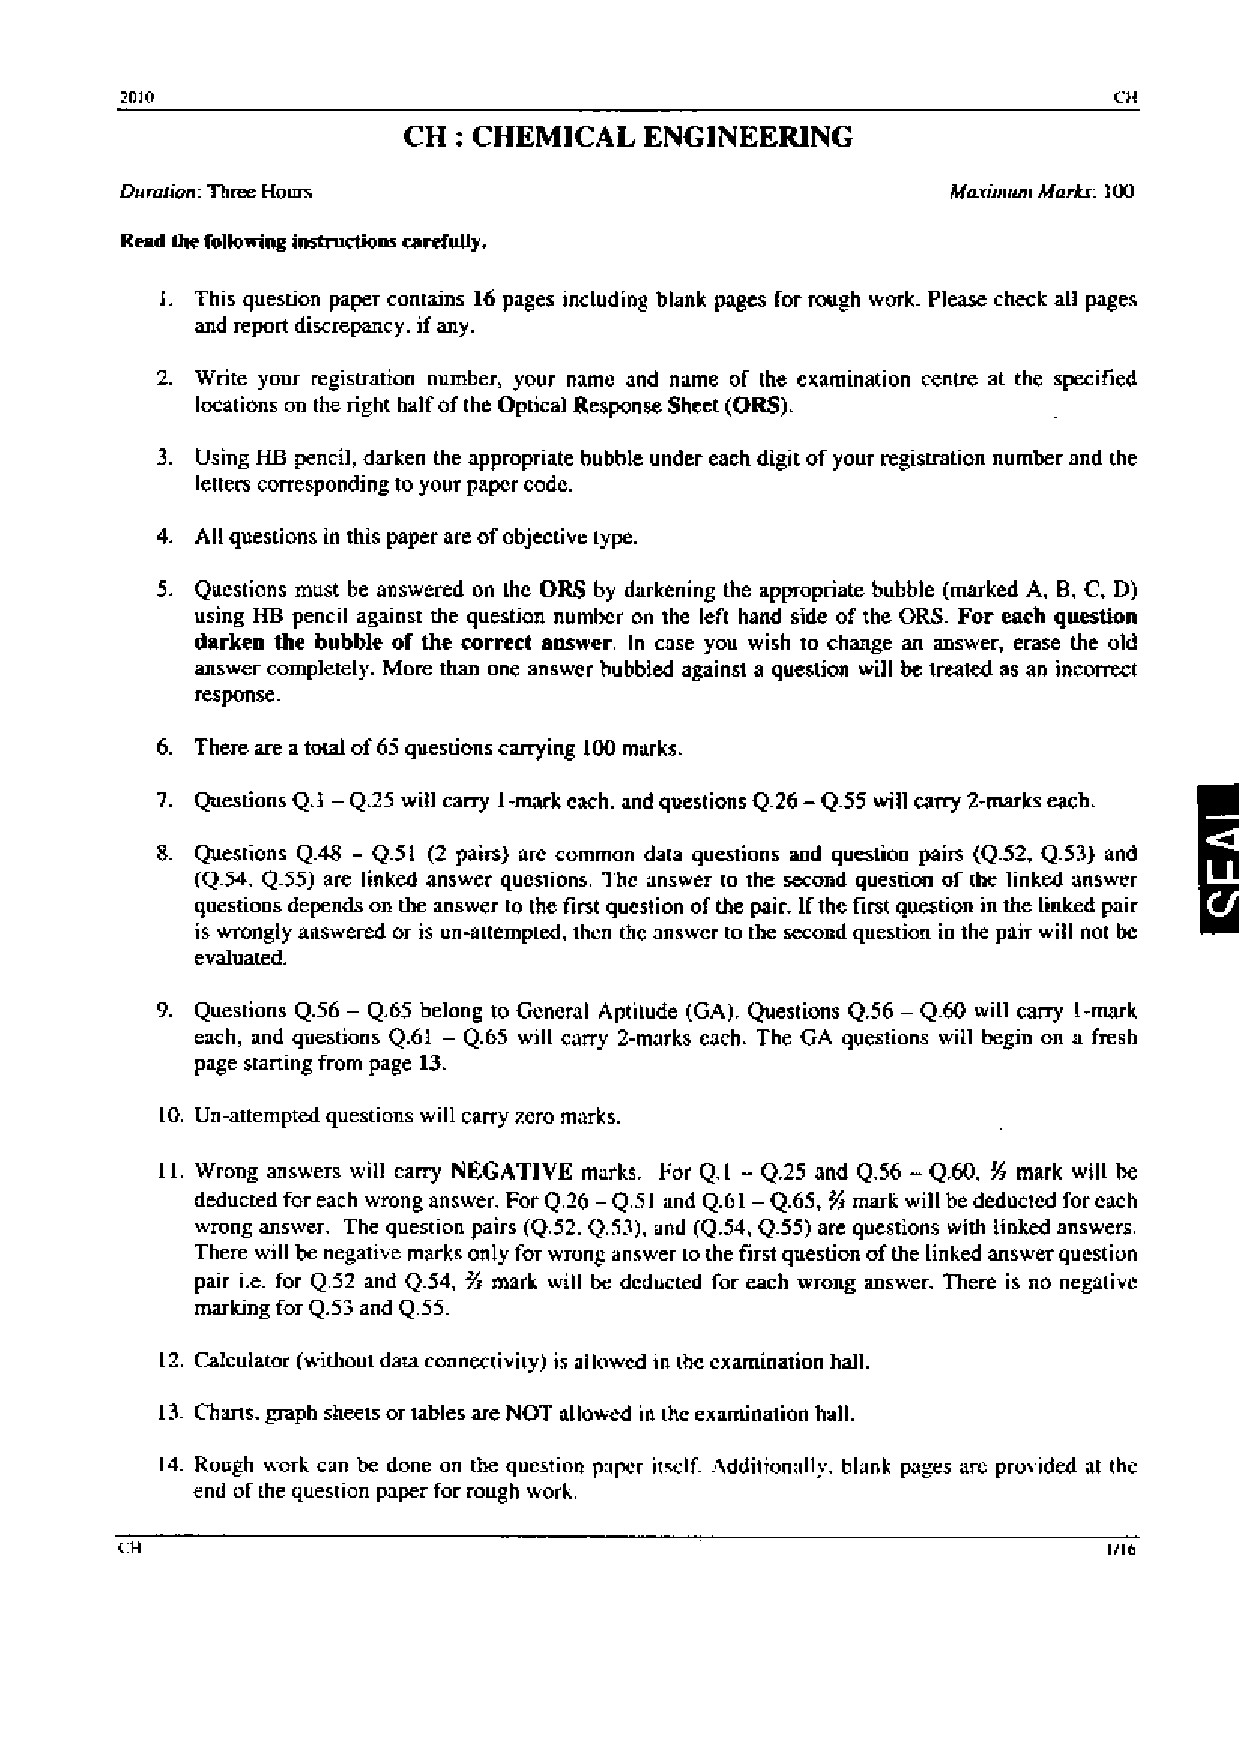 GATE Exam Question Paper 2010 Chemical Engineering 1